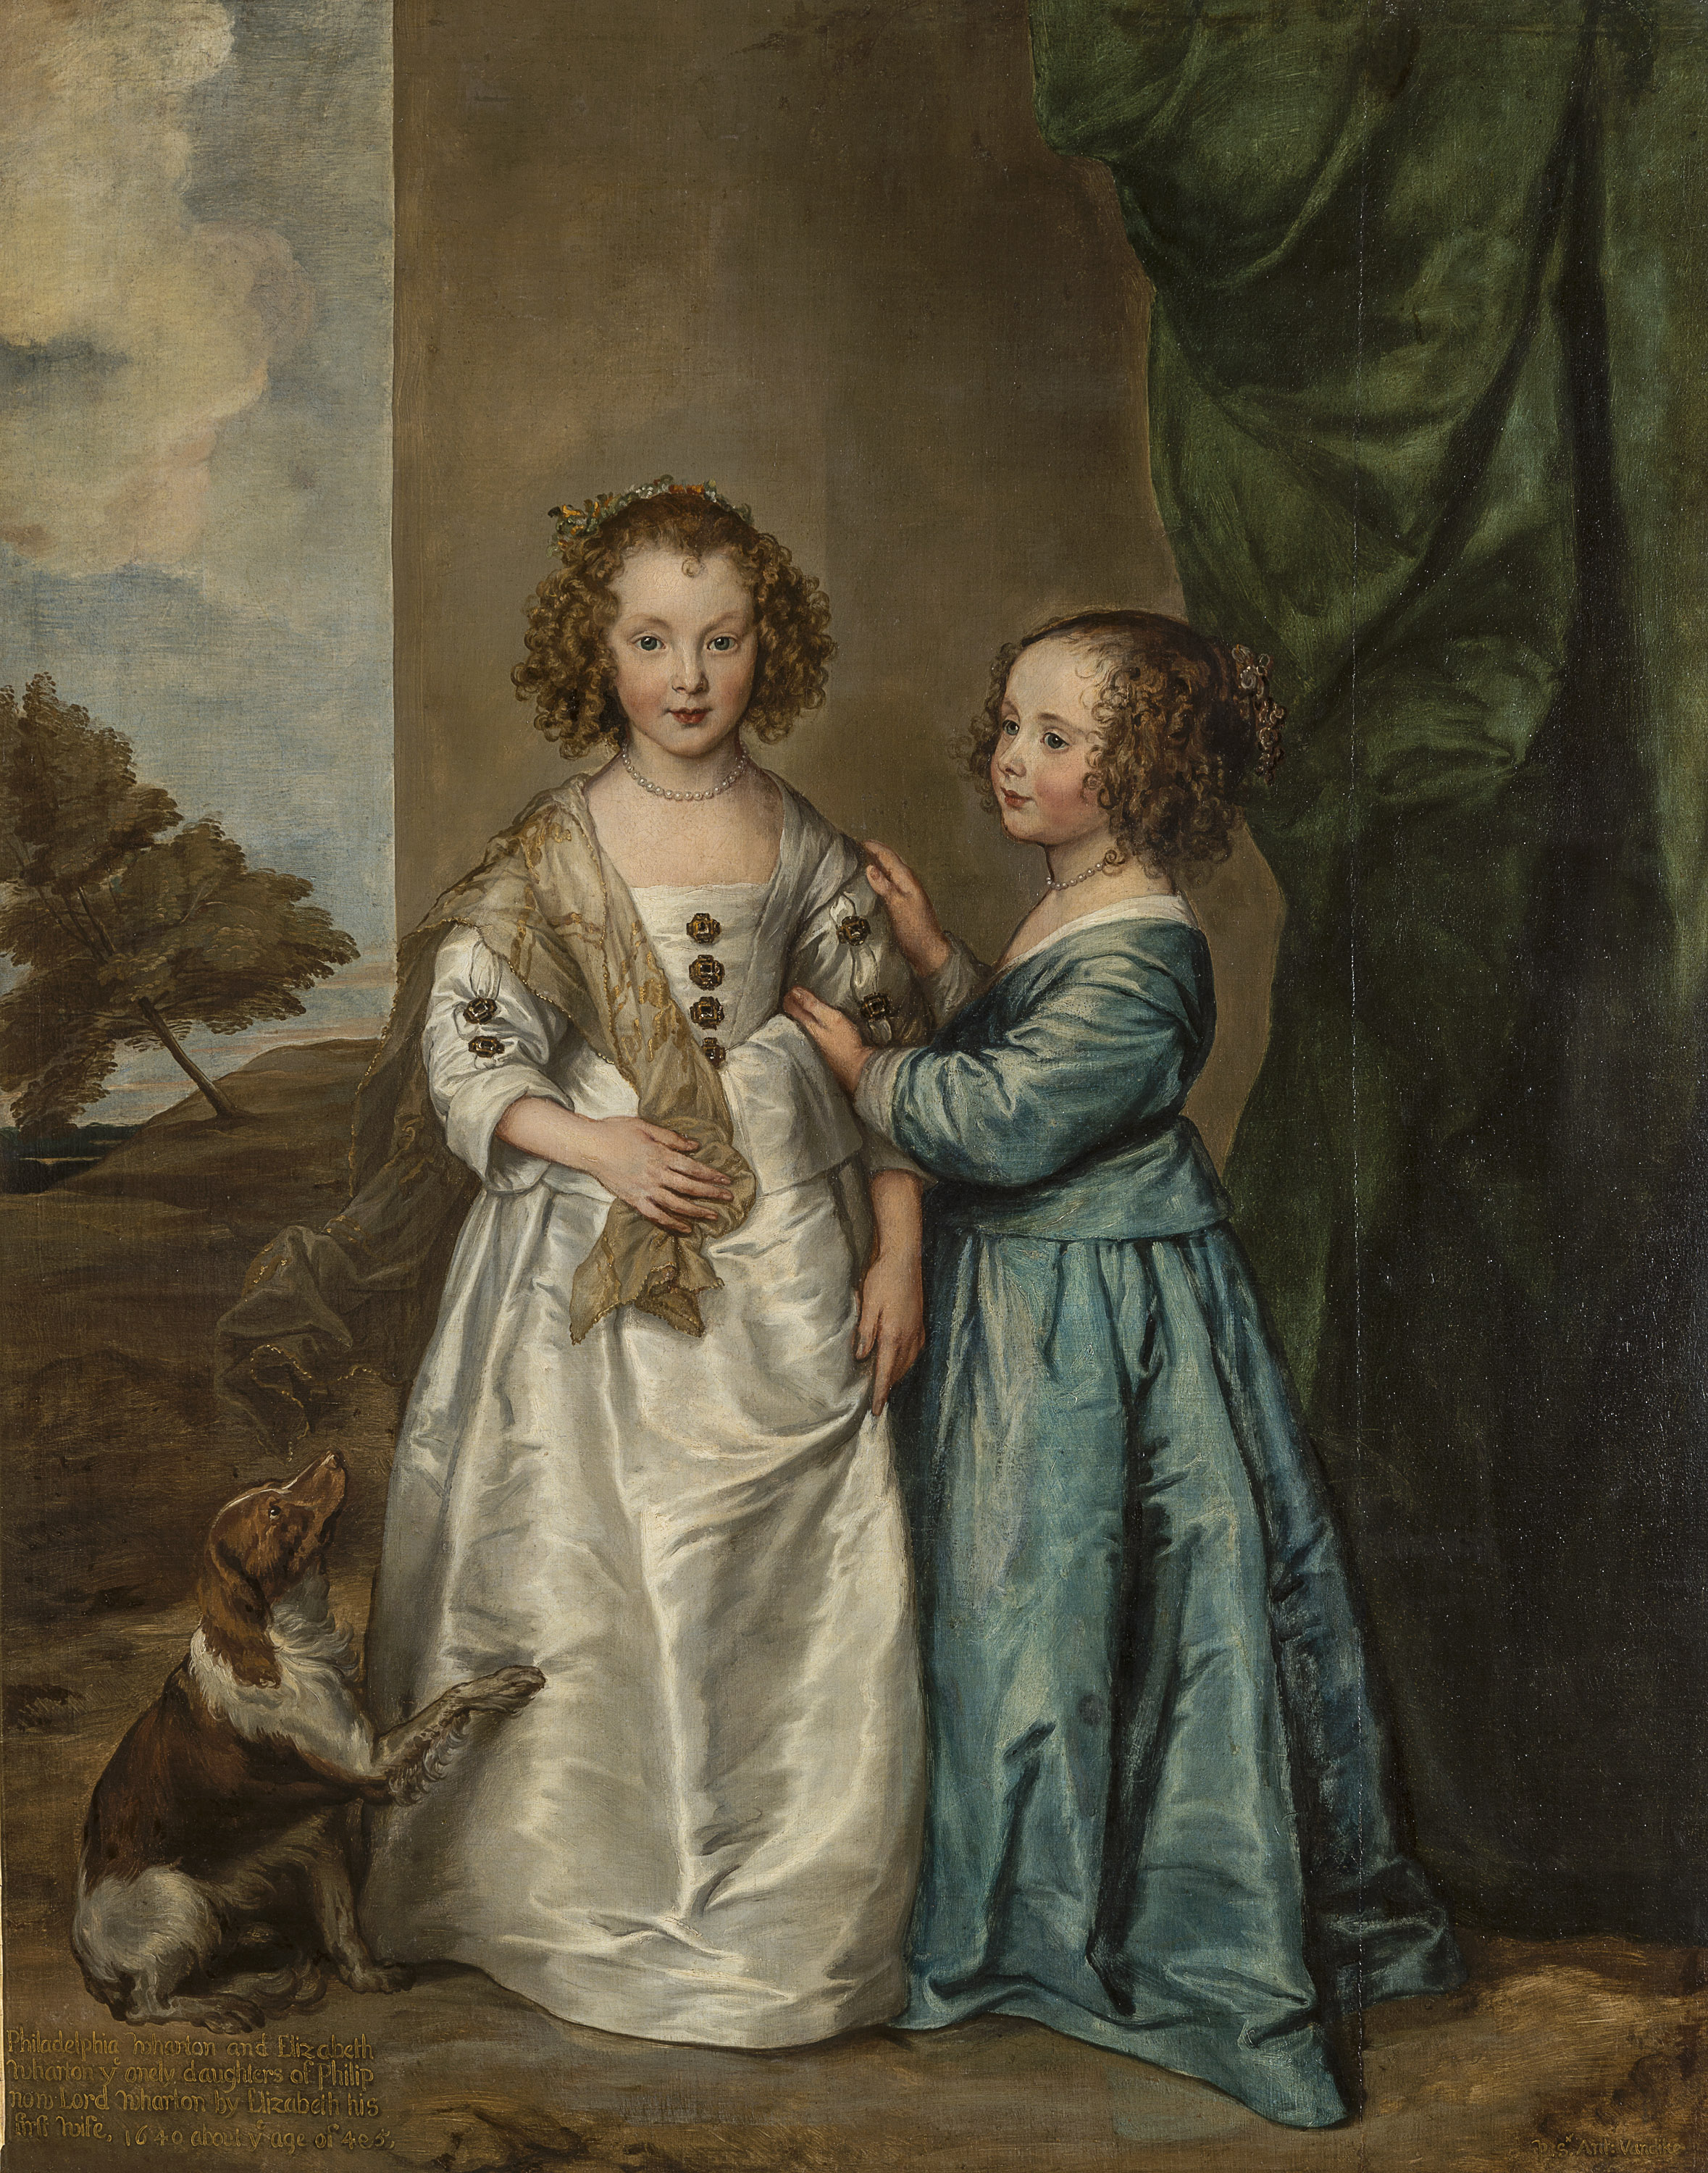 Anthony van DYCK (Flemish 1599–1641), Portrait of Philadelphia and Elizabeth Wharton, 1640, oil on canvas, 162.0 х 130.0 cm, The State Hermitage Museum, St Petersburg (Inv. no. ГЭ-533), Acquired from the collection of Sir Robert Walpole, Houghton Hall, 1779